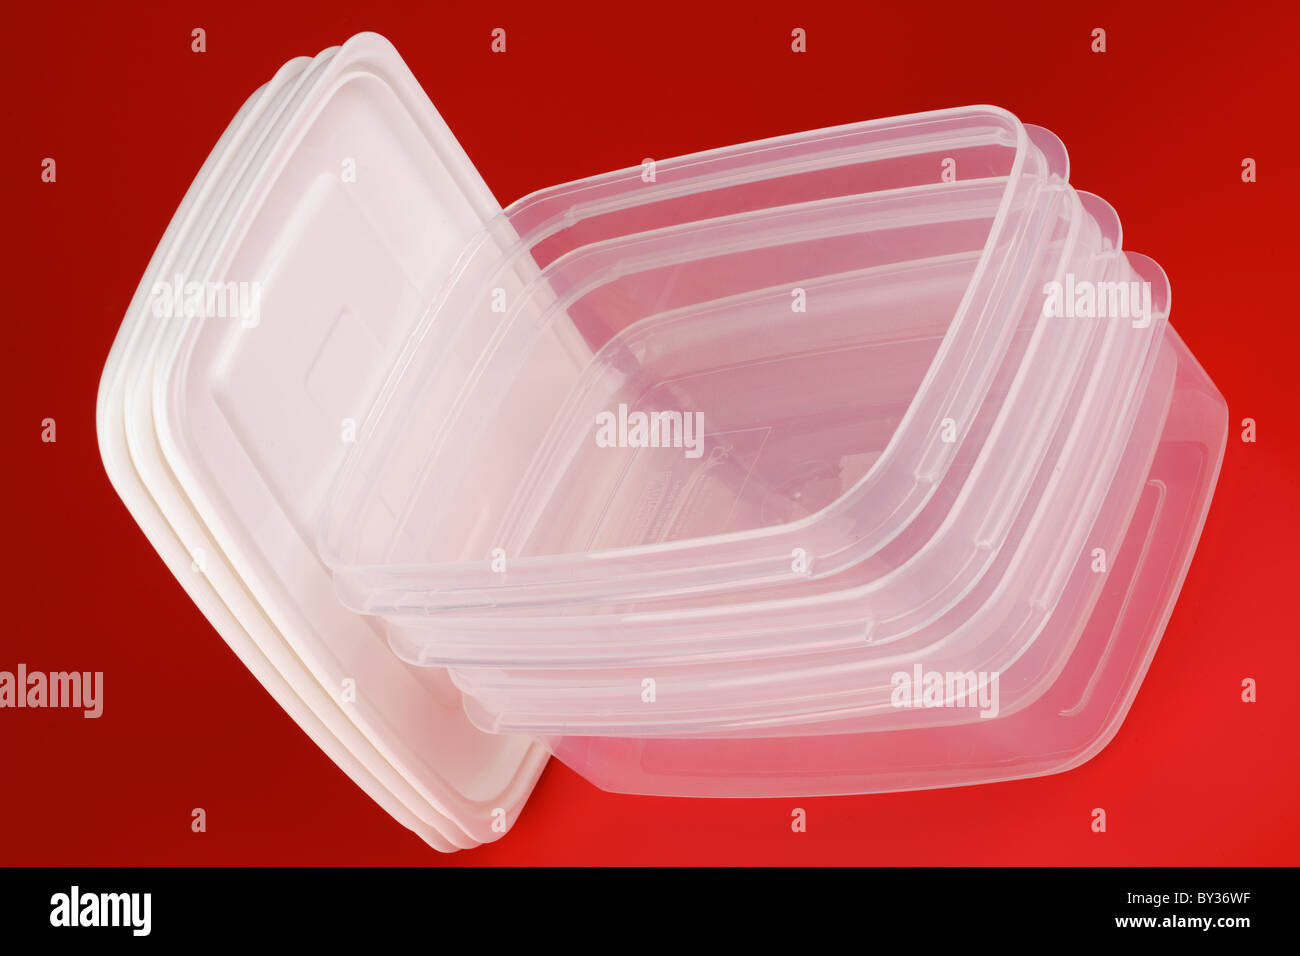 Three plastic food storer containers microwaveable freezer safe whitefurze food storers Stock Photo